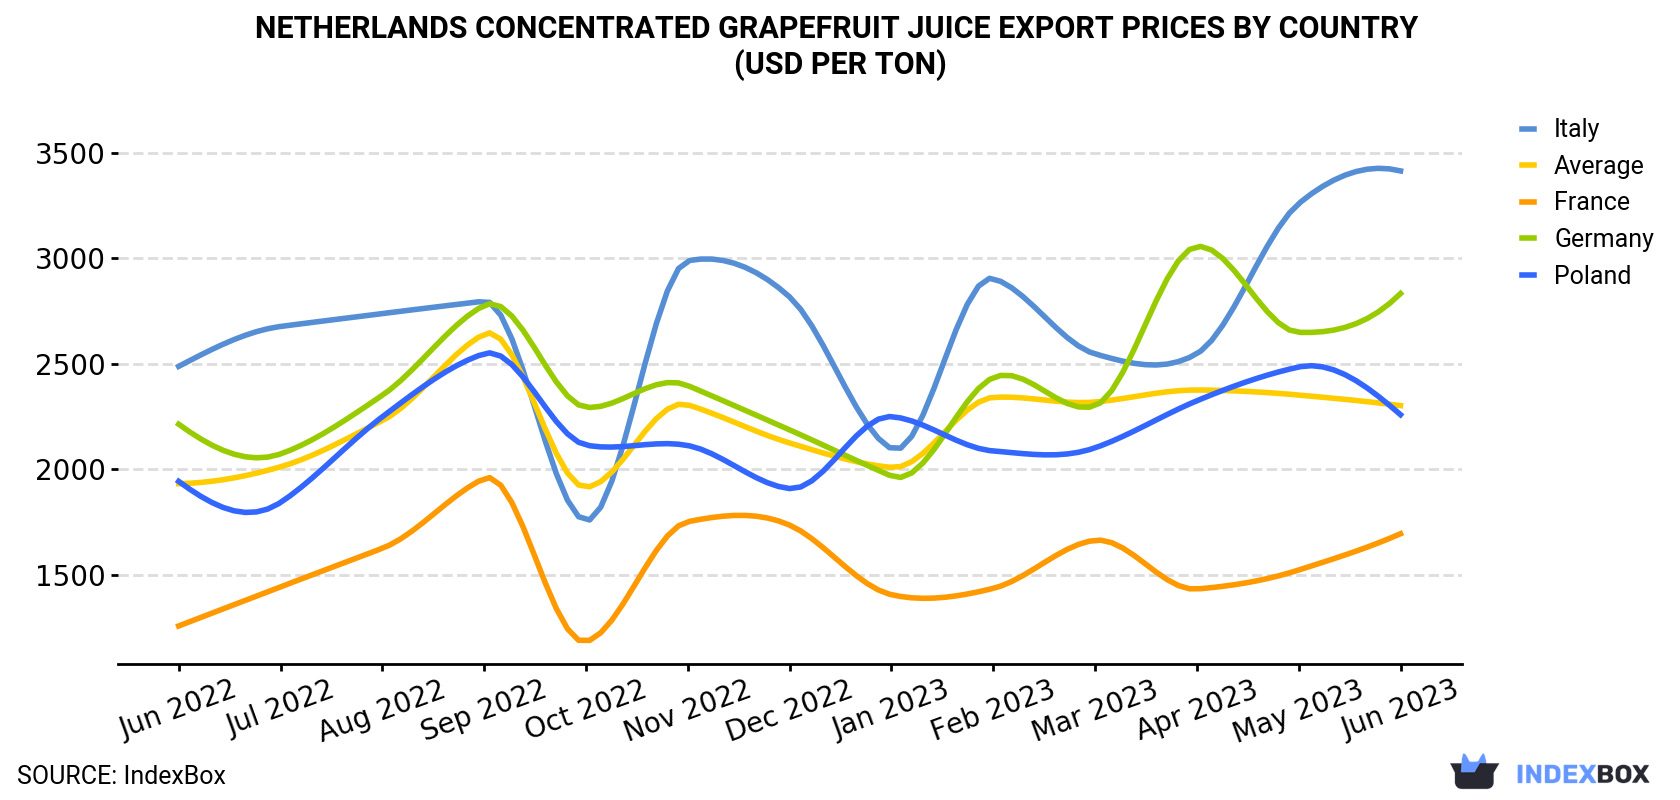 Netherlands Concentrated Grapefruit Juice Export Prices By Country (USD Per Ton)